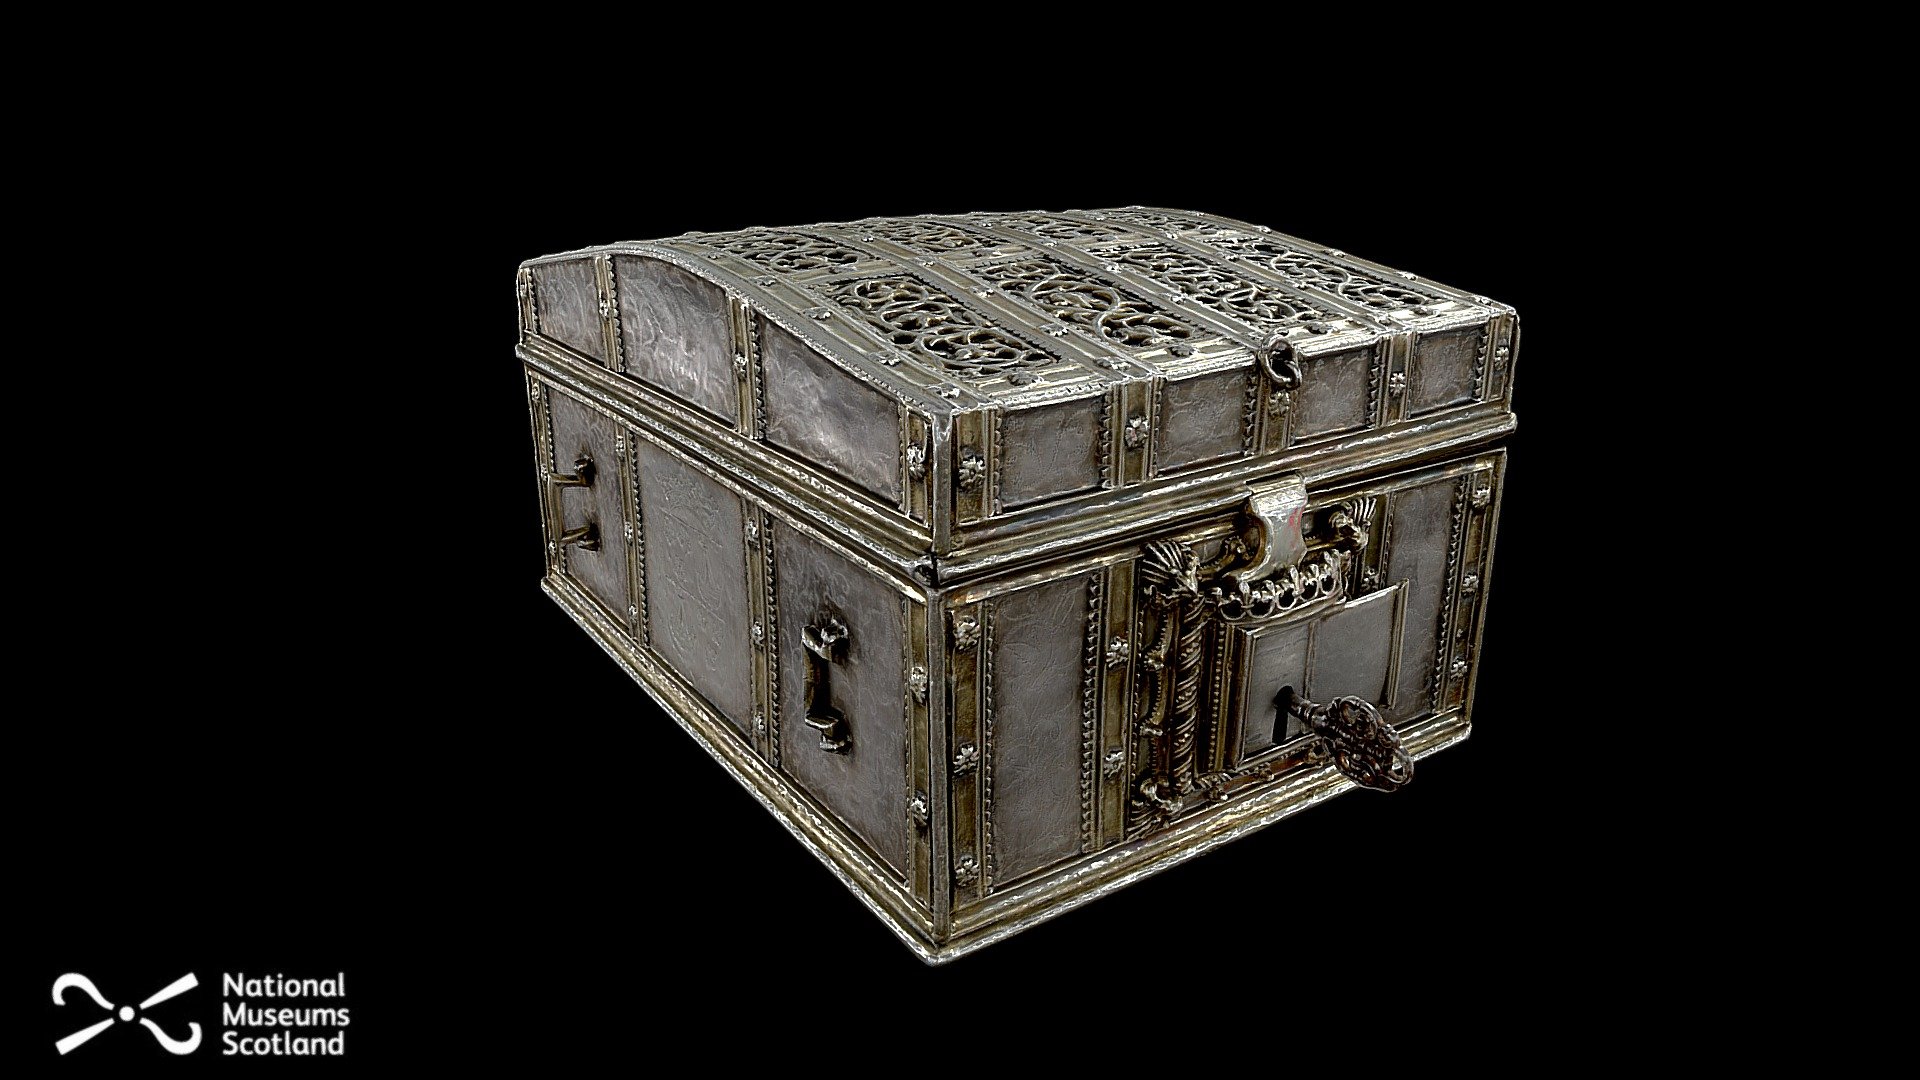 A finely decorated silver-gilt casket, made in Paris around 1490-1510, and believed to have been owned by Mary, Queen of Scots. It is an extremely rare example of French silver from the Renaissance era because much was melted down for their precious metals. Its survival attests to its association with Mary, and it has been treasured as a relic of this unfortunate queen by the Dukes of Hamilton for over 340 years. 

Its particular renown derives from the belief that it is the casket that was dramatically produced at a hearing against Mary at Westminster in 1568, containing the notorious ‘Casket Letters’, used as evidence of the queen's complicity in the murder of her husband Henry, Lord Darnley. 

Discover more about Mary, Queen of Scots: https://www.nms.ac.uk/mary 

Accession No.: X.2022.28.1-4 
Material: Silver, with traces of silver-gilt 
Dimensions: 110 mm H x 210 W x 147 D; weight, 1.8 kg 
Period: Late Medieval-Early Renaissance, c.1490-1510 
Images: Neil McLean. Model: Dr Hugo Anderson-Whymark, 21/02/22 - The Mary, Queen of Scots Casket - 3D model by National Museums Scotland (@nationalmuseumsscotland) 3d model